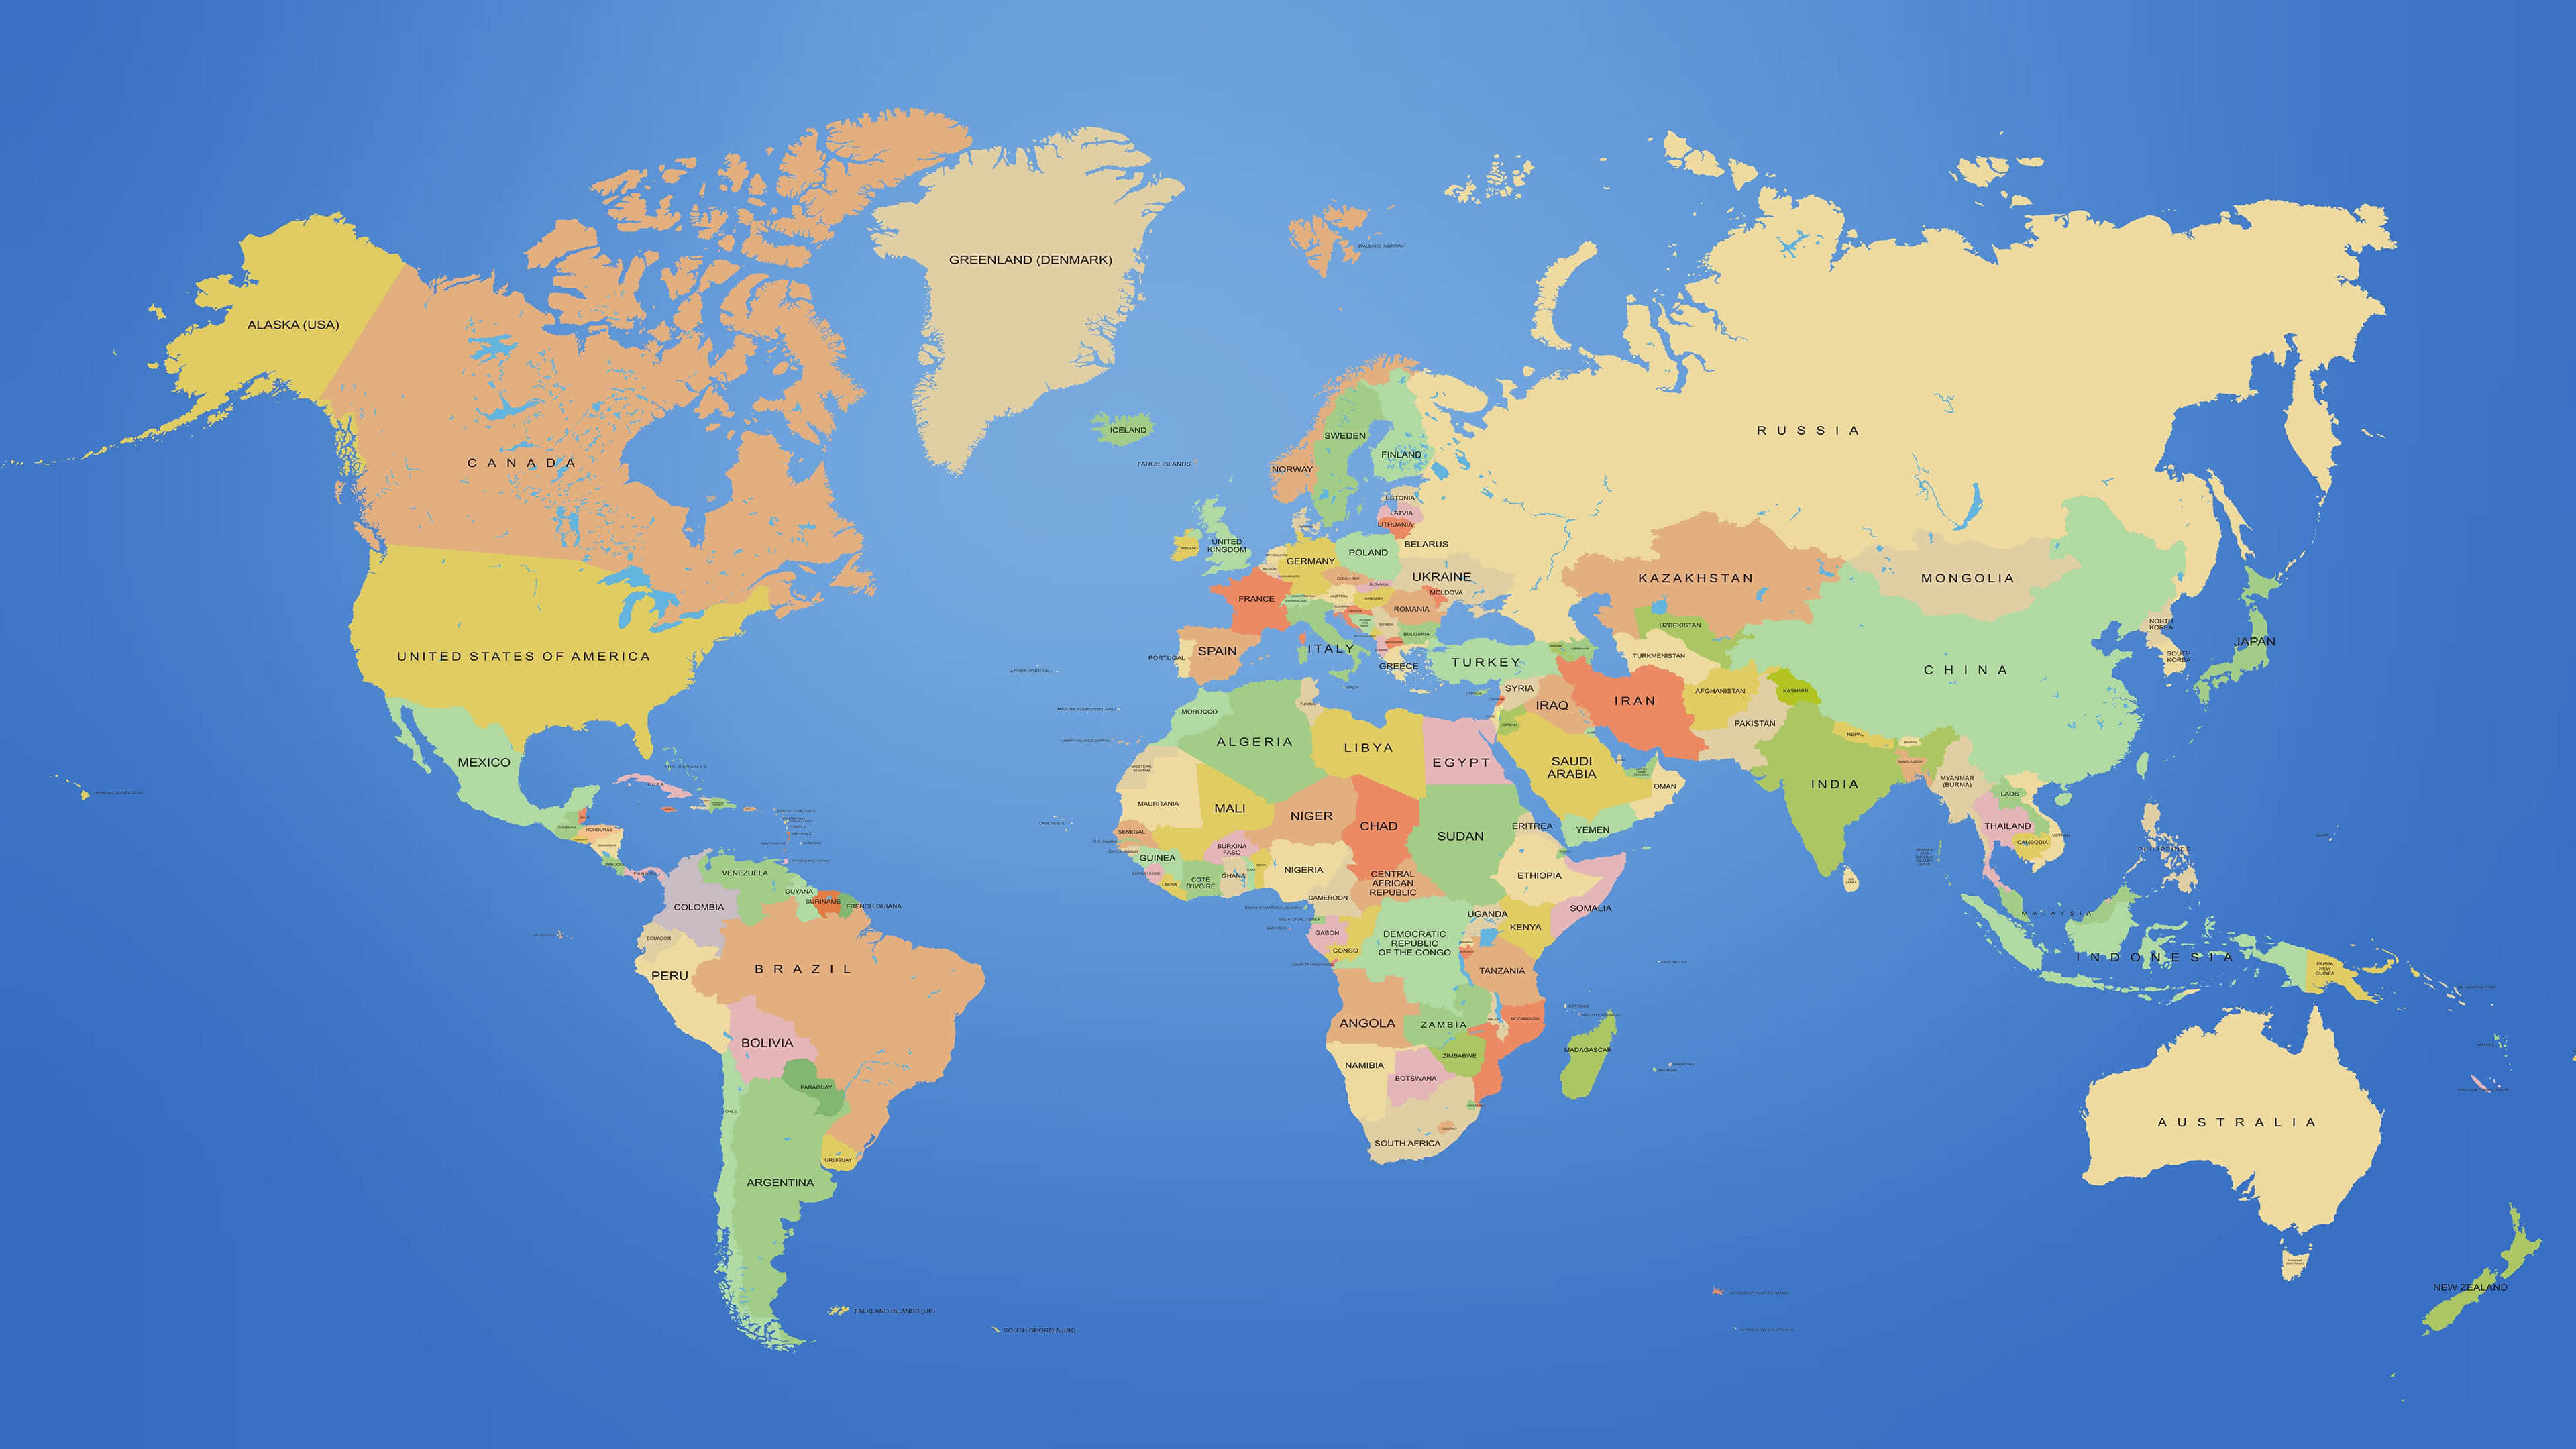 4k Political World Map Hd Political Map Of The World World Map Images